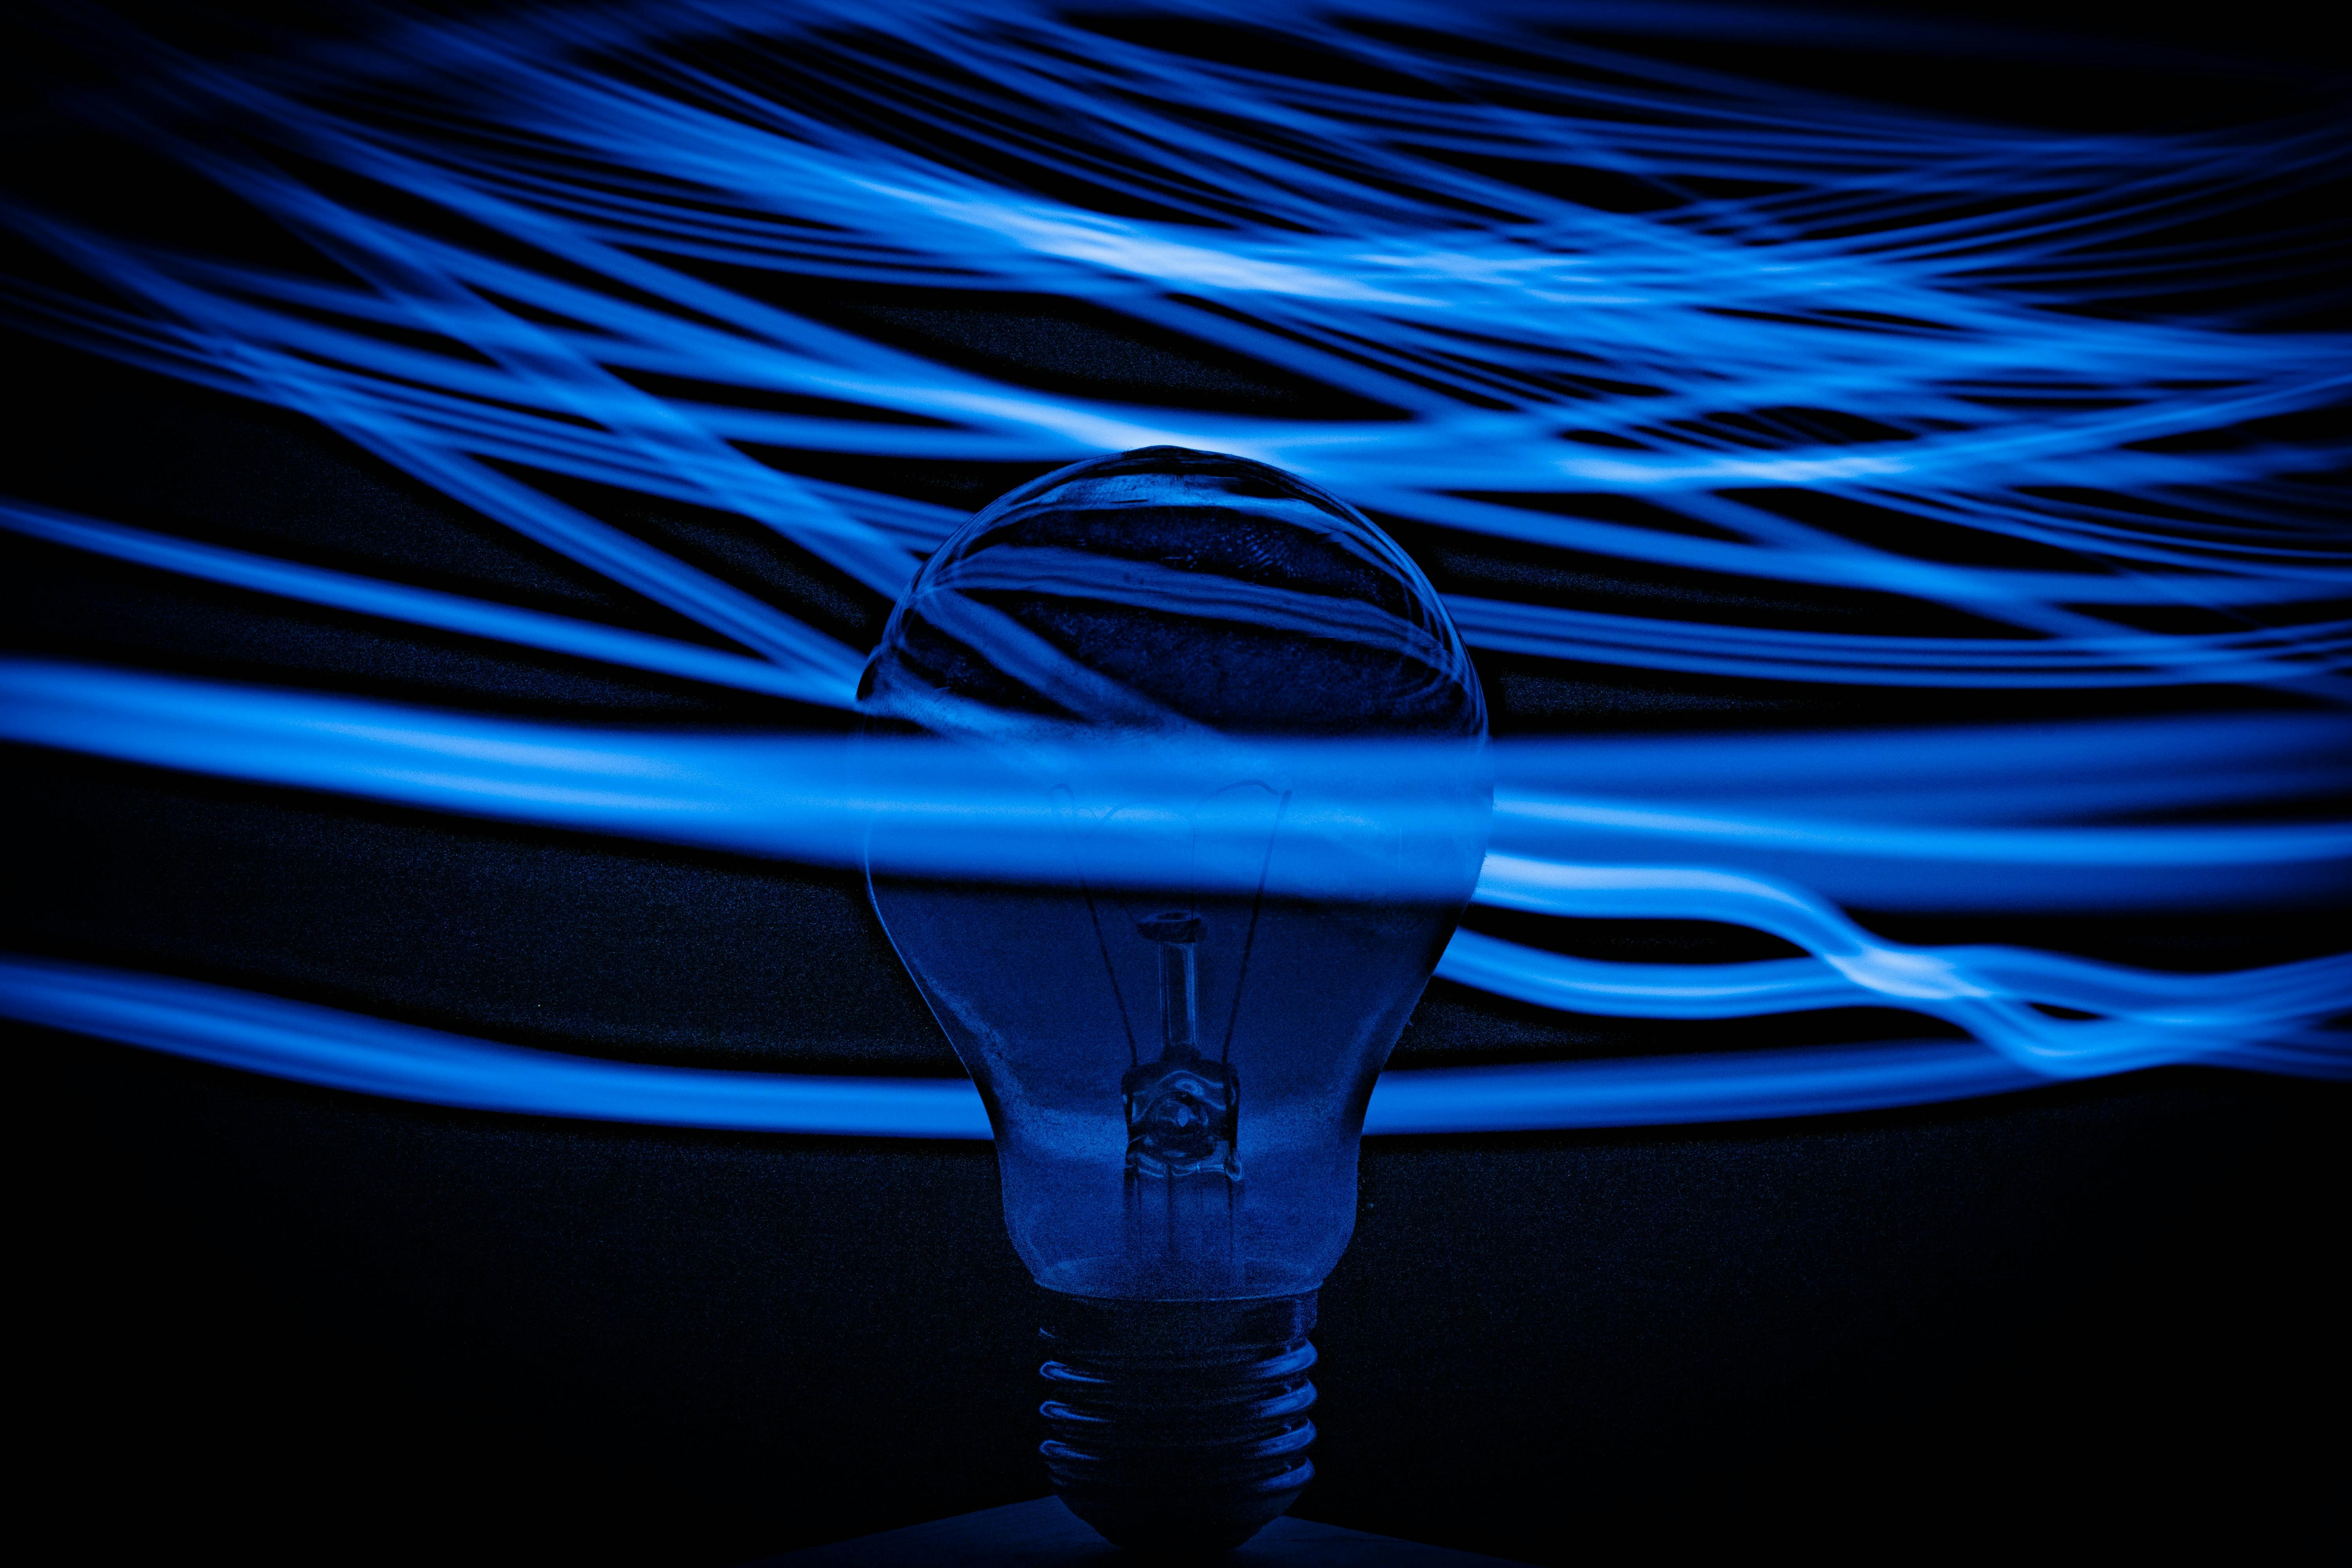 NRF Expo 2023 - Key insights. A lightbulb in a dark room, surrounded by neon blue lights